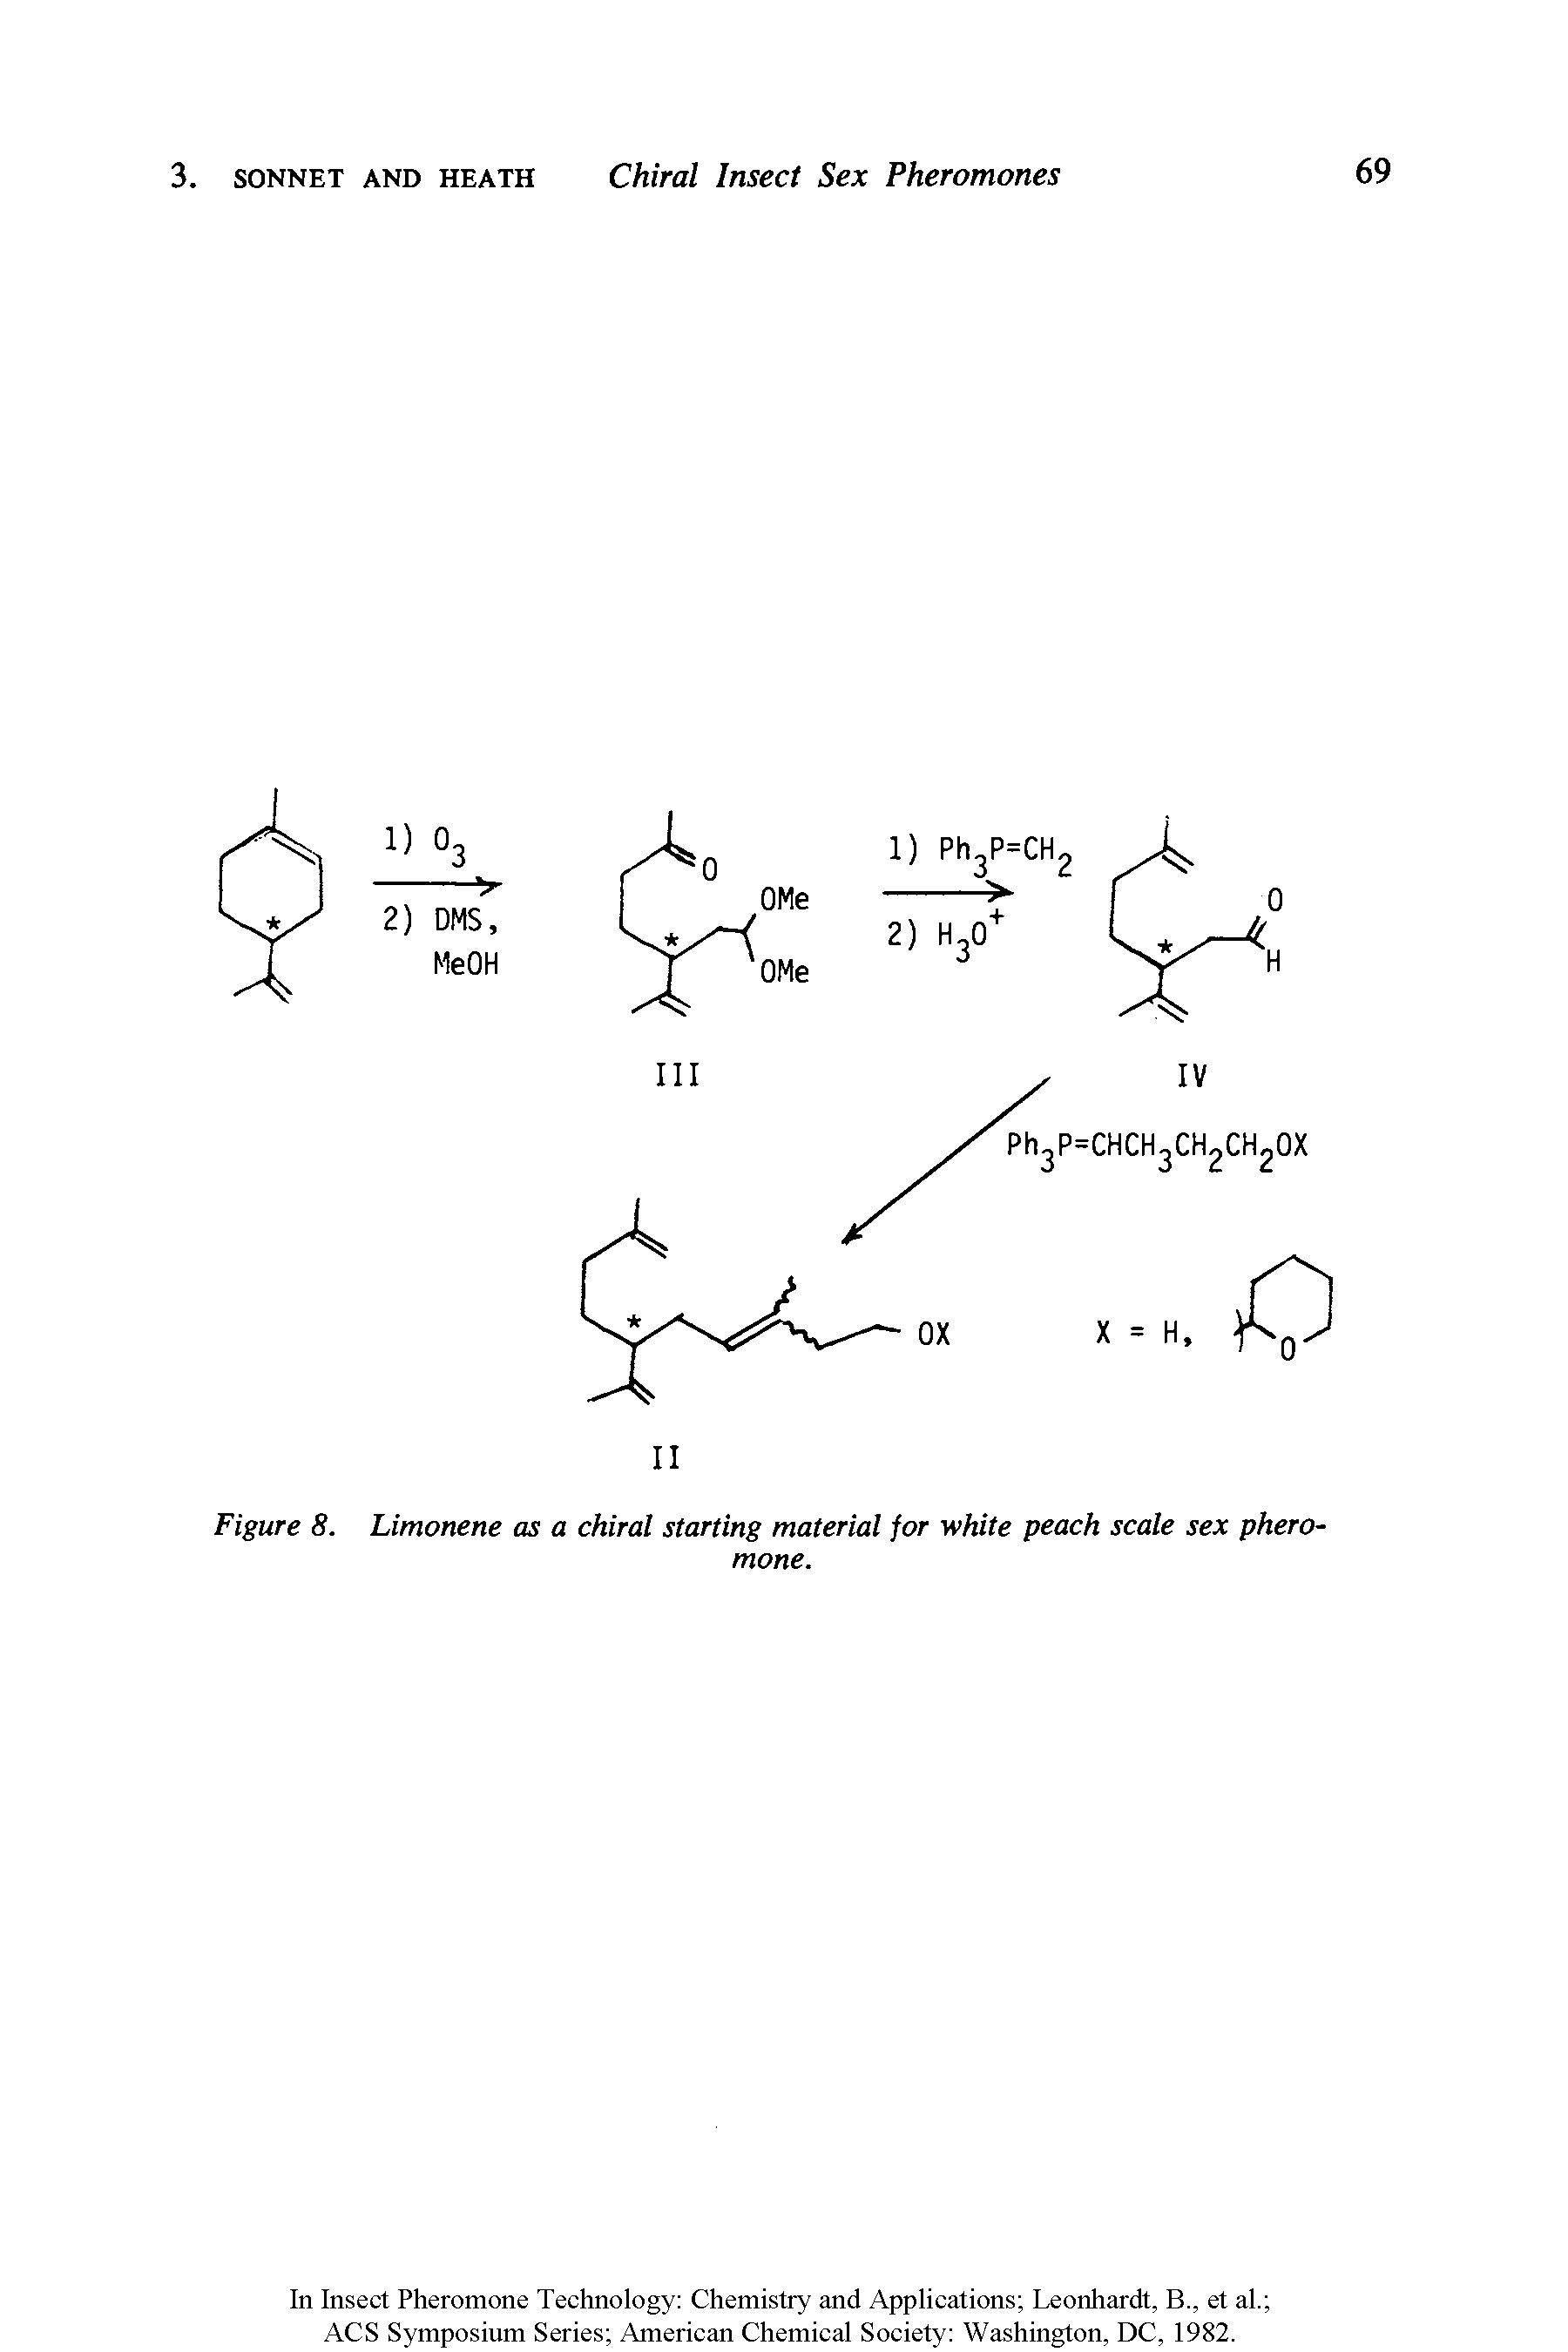 Figure 8. Limonene as a chiral starting material for white peach scale sex pheromone.